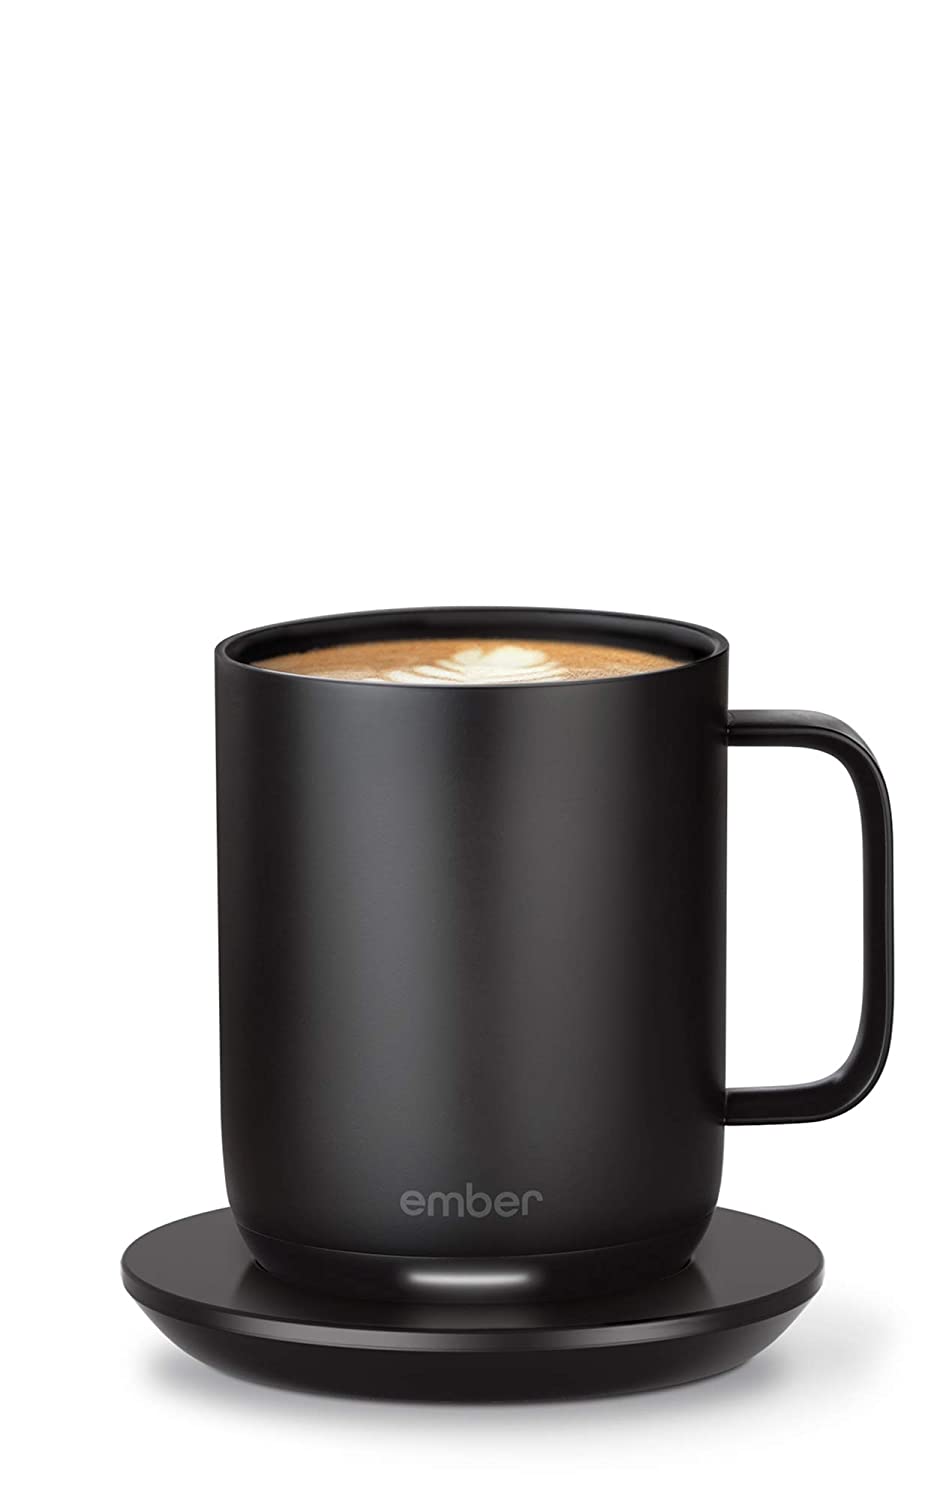 gifts for engineers - Ember Temperature Control Smart Mug